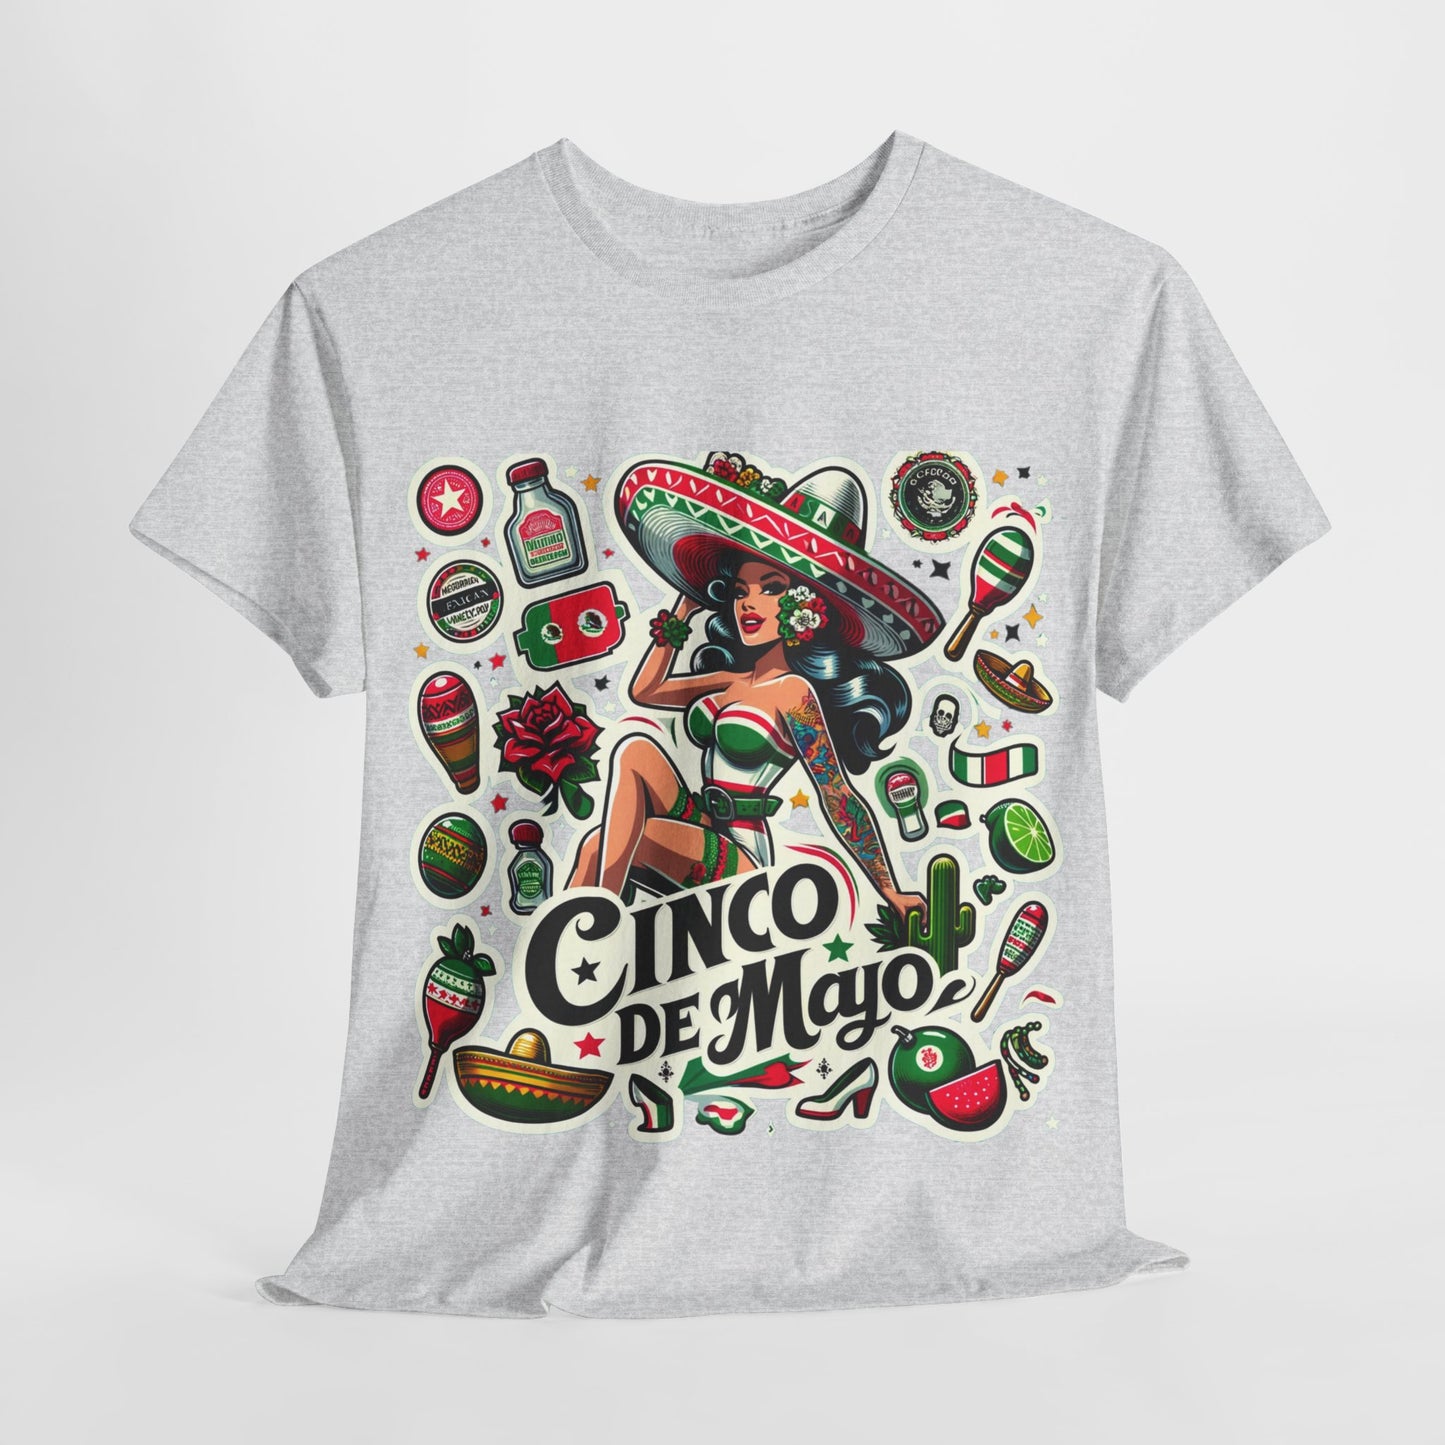 Buy Limited Edition Cinco de Mayo T-Shirt - Vibrant Pin-Up Style with Mexican Heritage